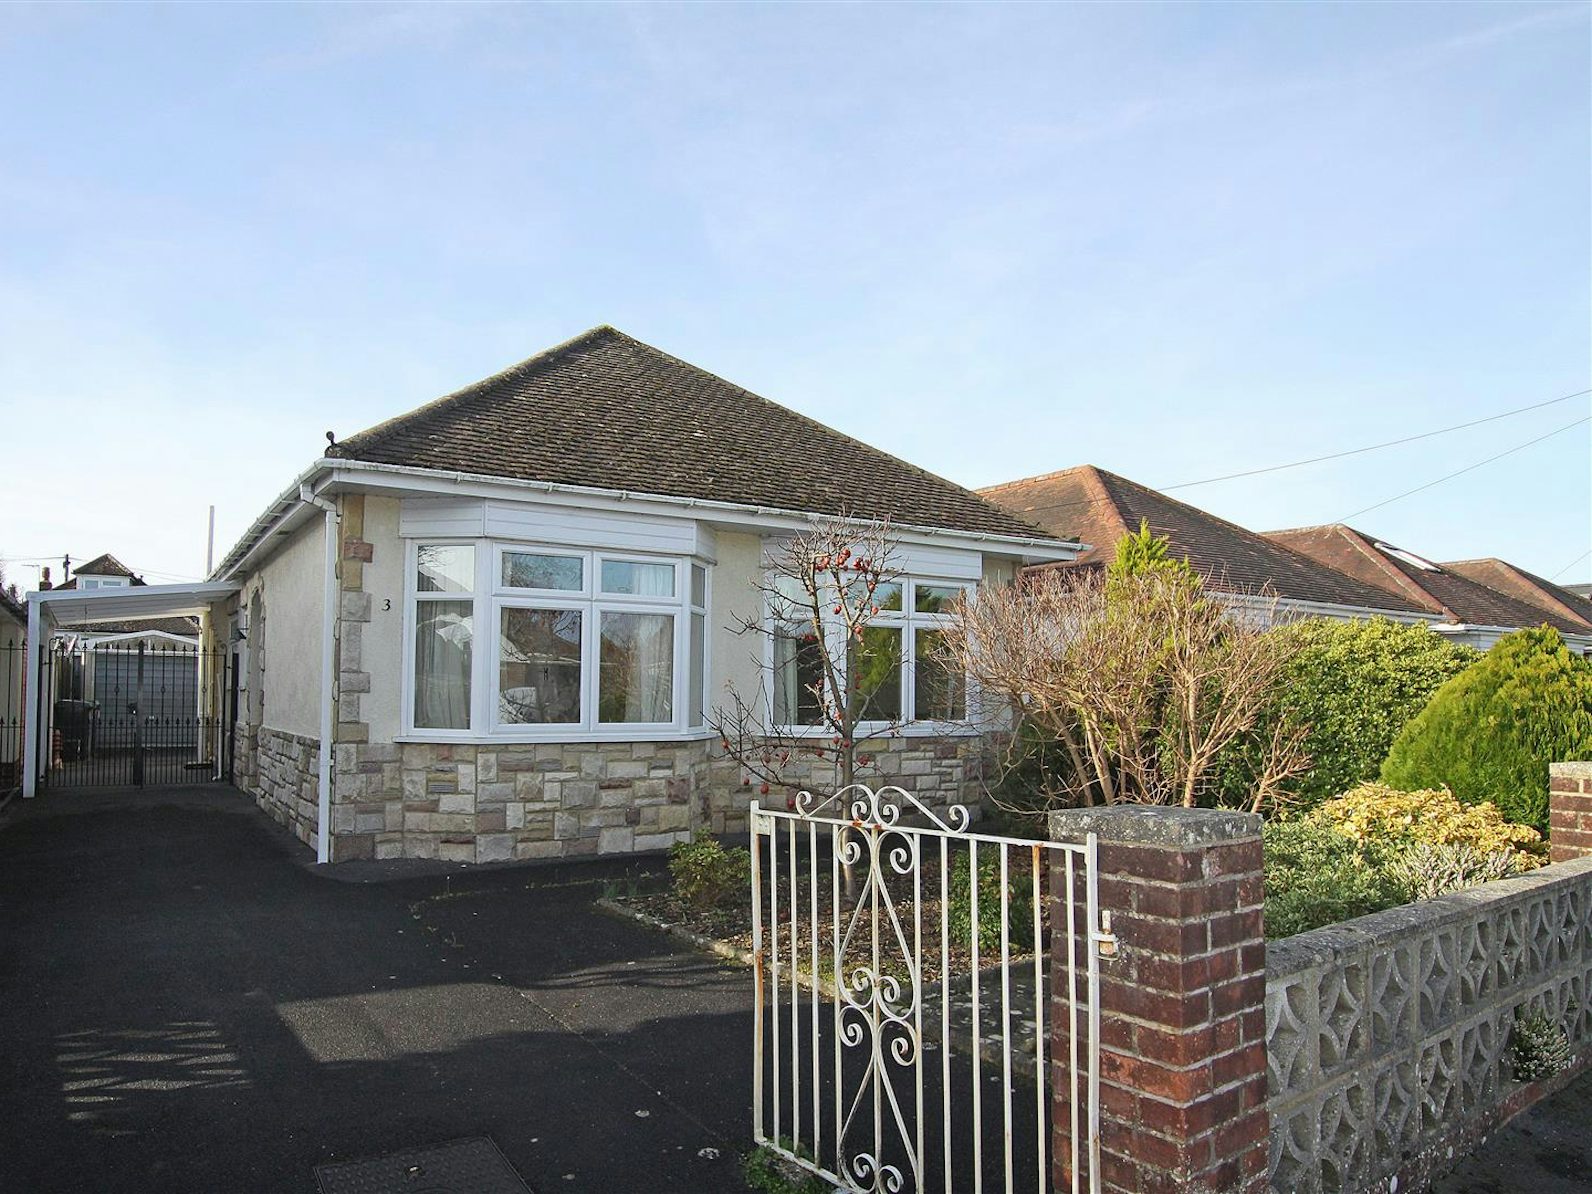 Detached bungalow for sale on Newmorton Road Muscliff, Bournemouth, BH9